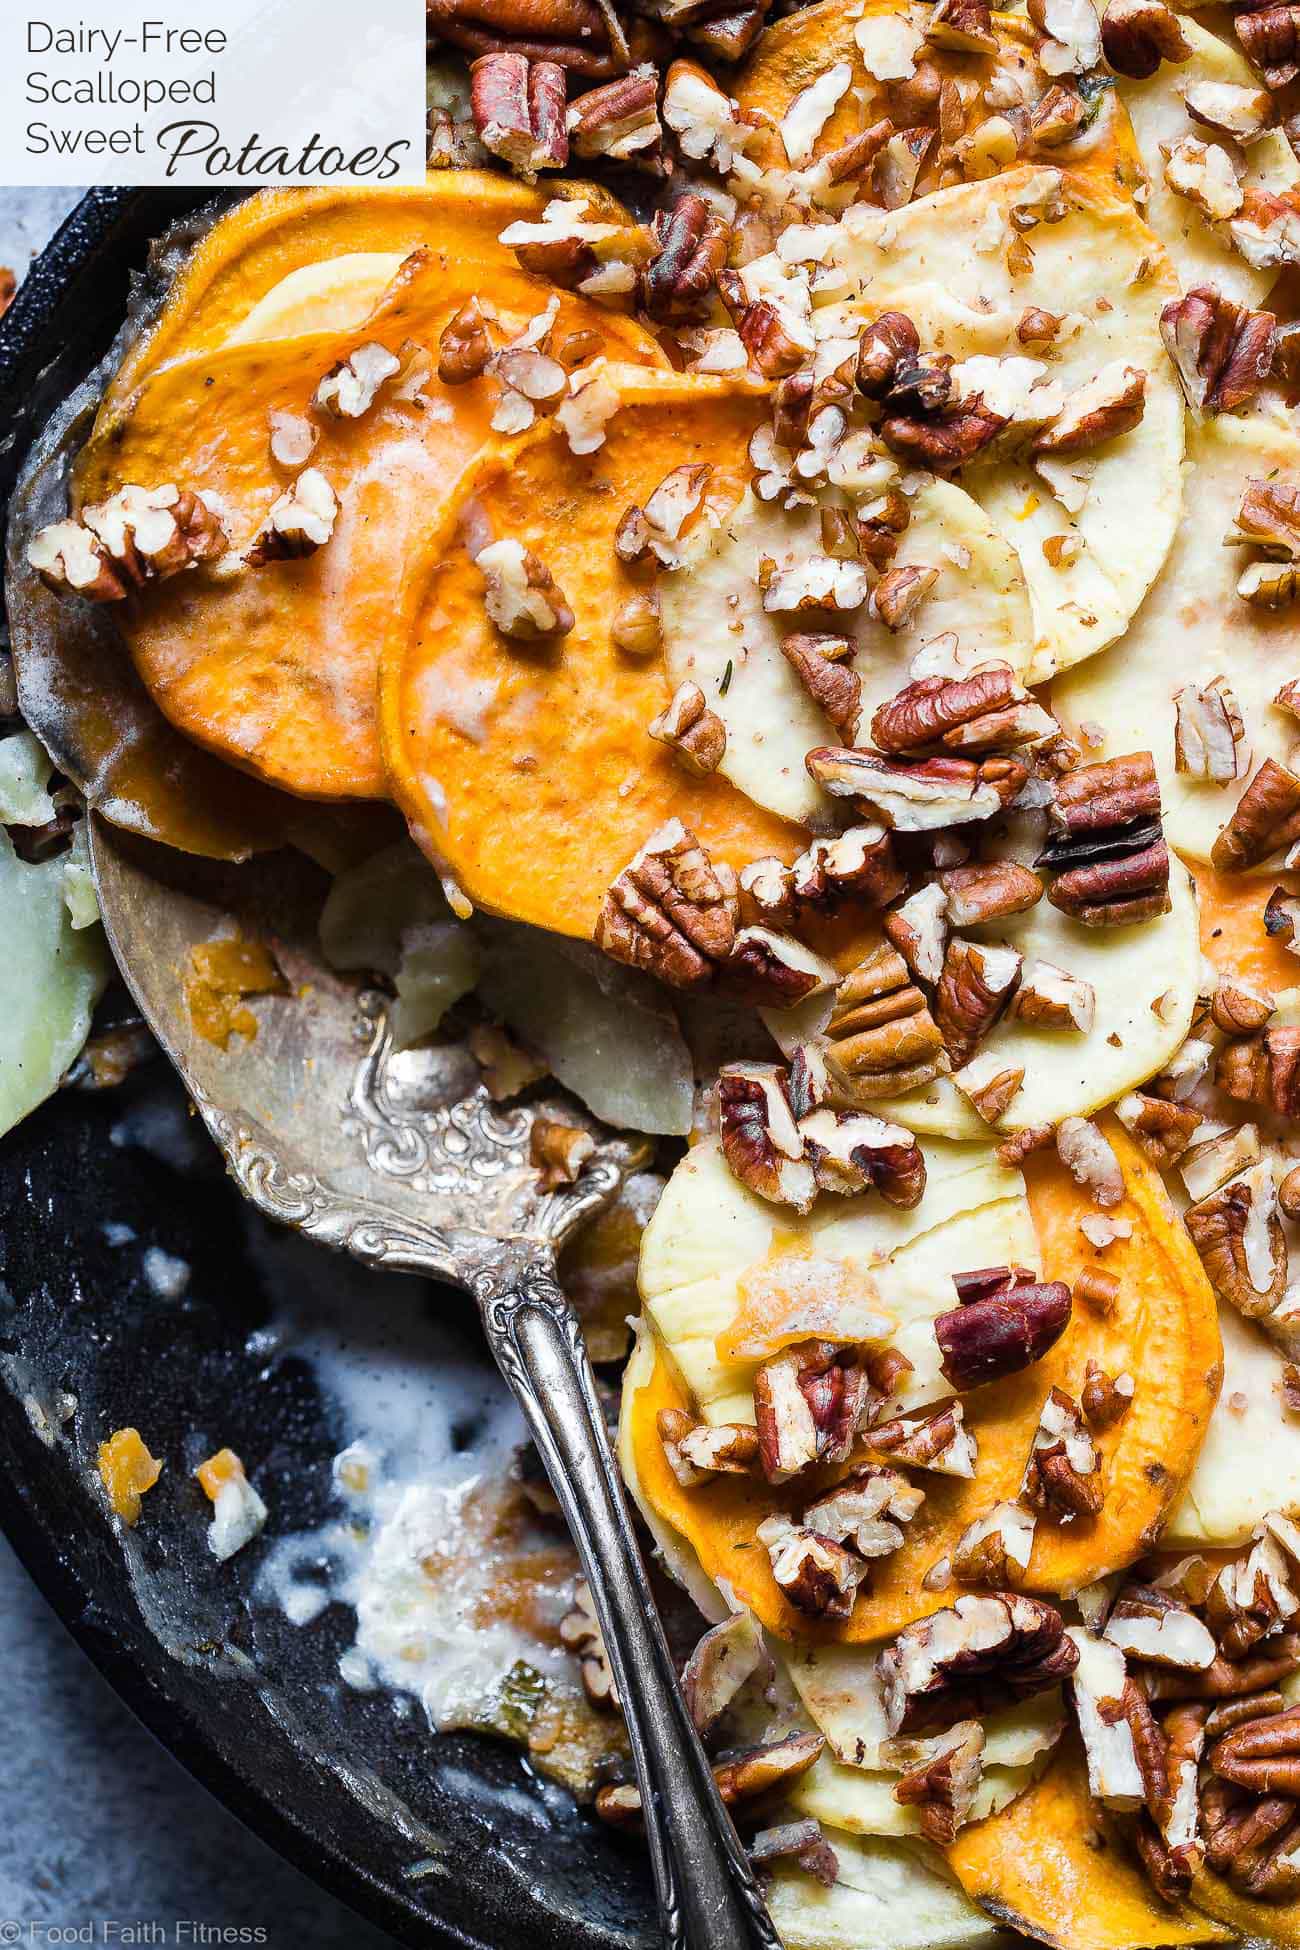 Healthy Scalloped Sweet Potatoes Casserole - So rich and creamy, you will never believe it's gluten free and paleo/vegan/whole30 compliant! Perfect for a healthy Thanksgiving! | Foodfaithfitness.com | @FoodFaithFit